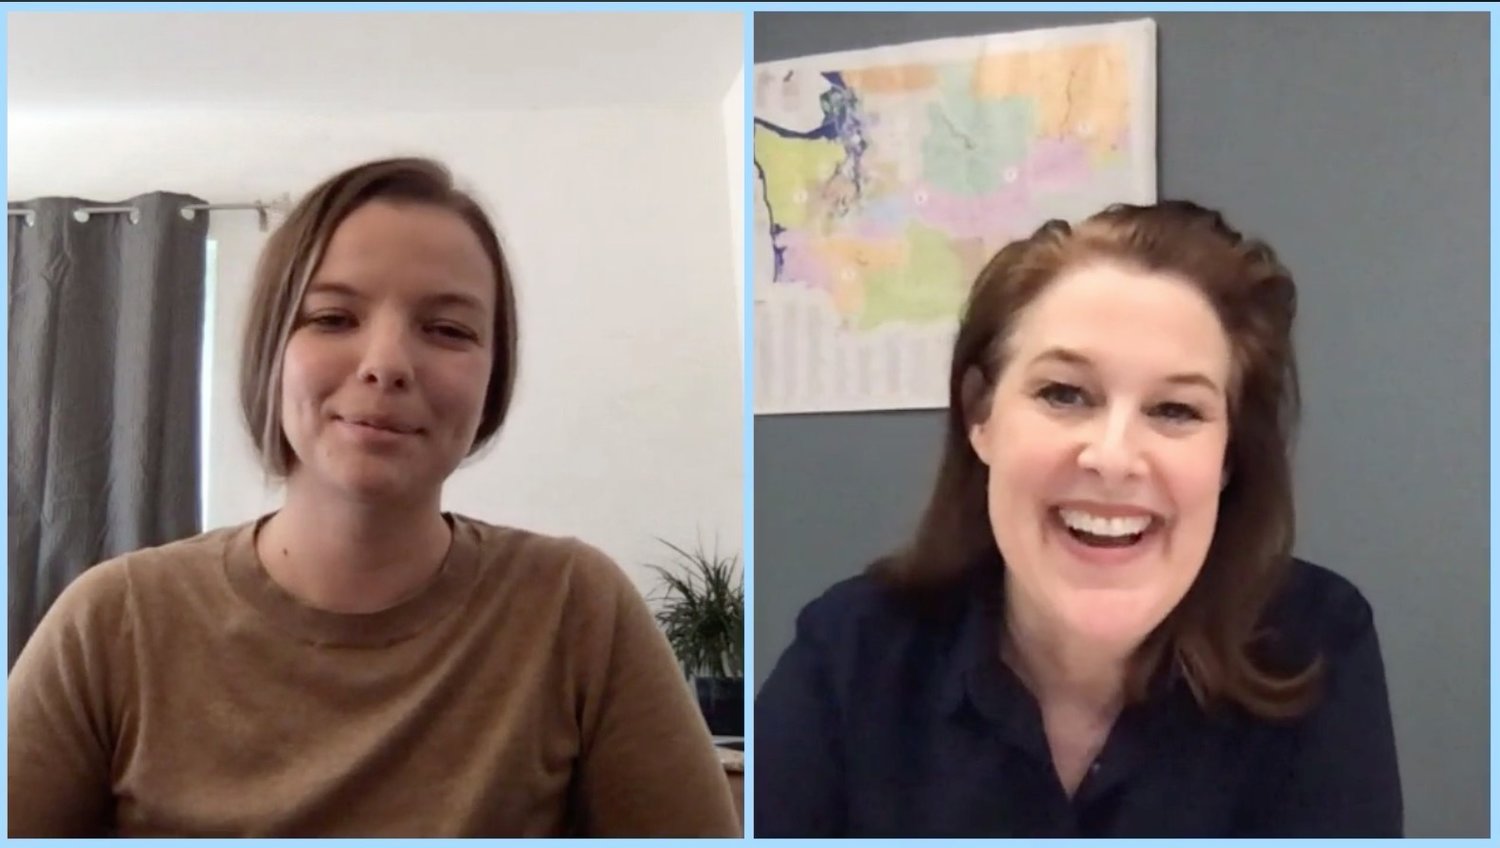 Washington Third Congressional District candidate Carolyn Long, right, and her campaign manager Abby Olmstead, address questions during a Facebook Live town hall event April 25.